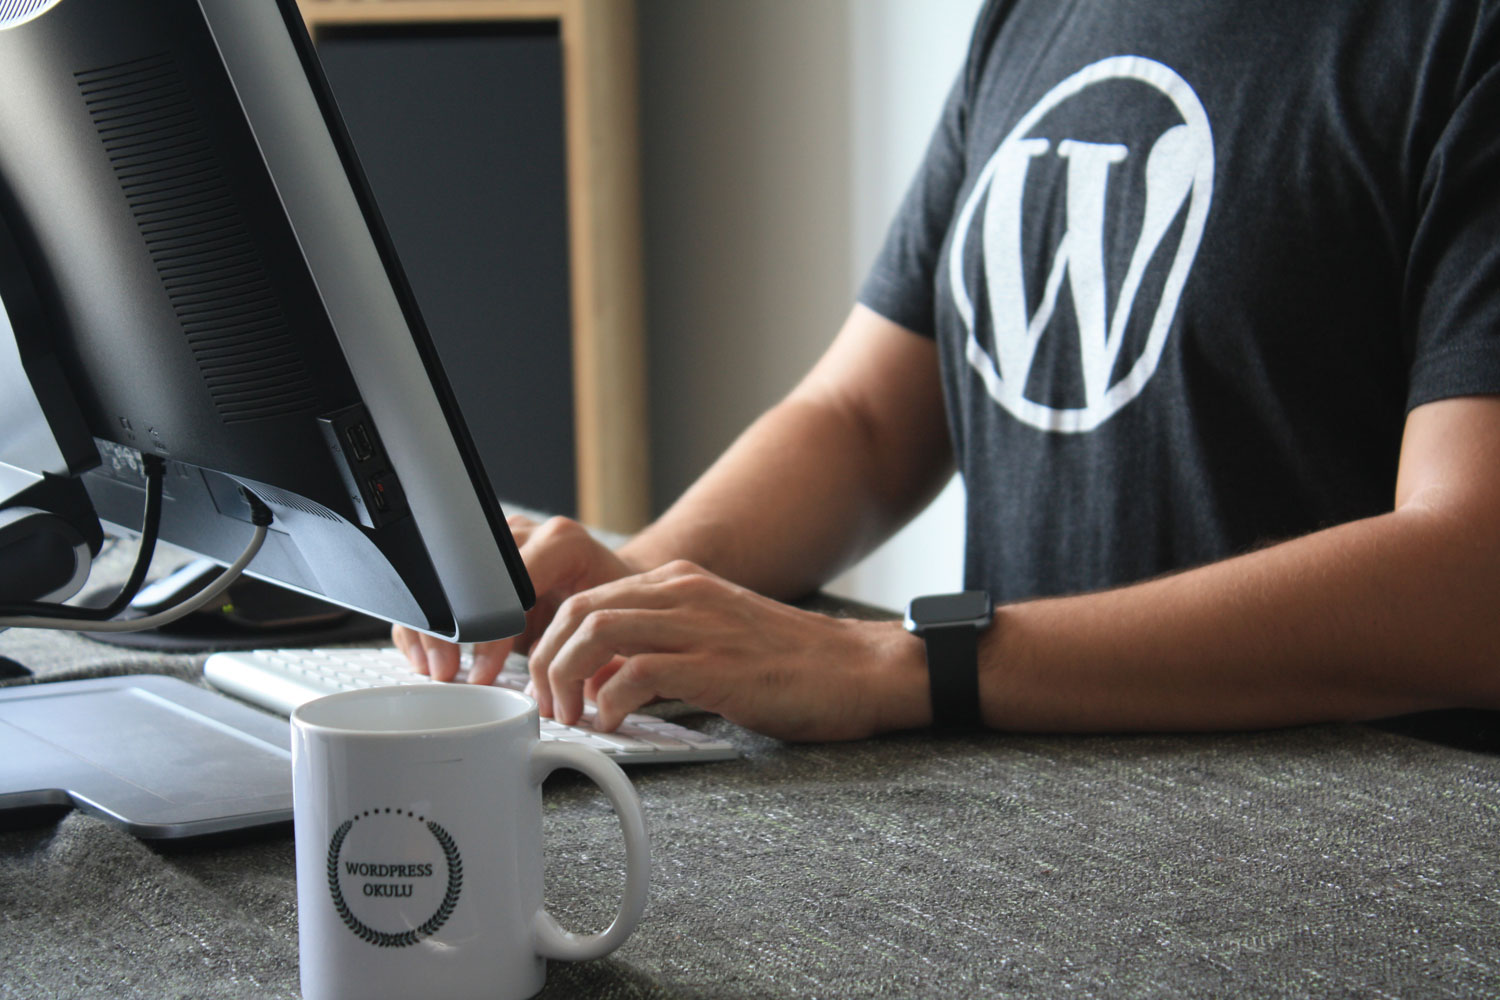 Best practices for WordPress website design and user experience